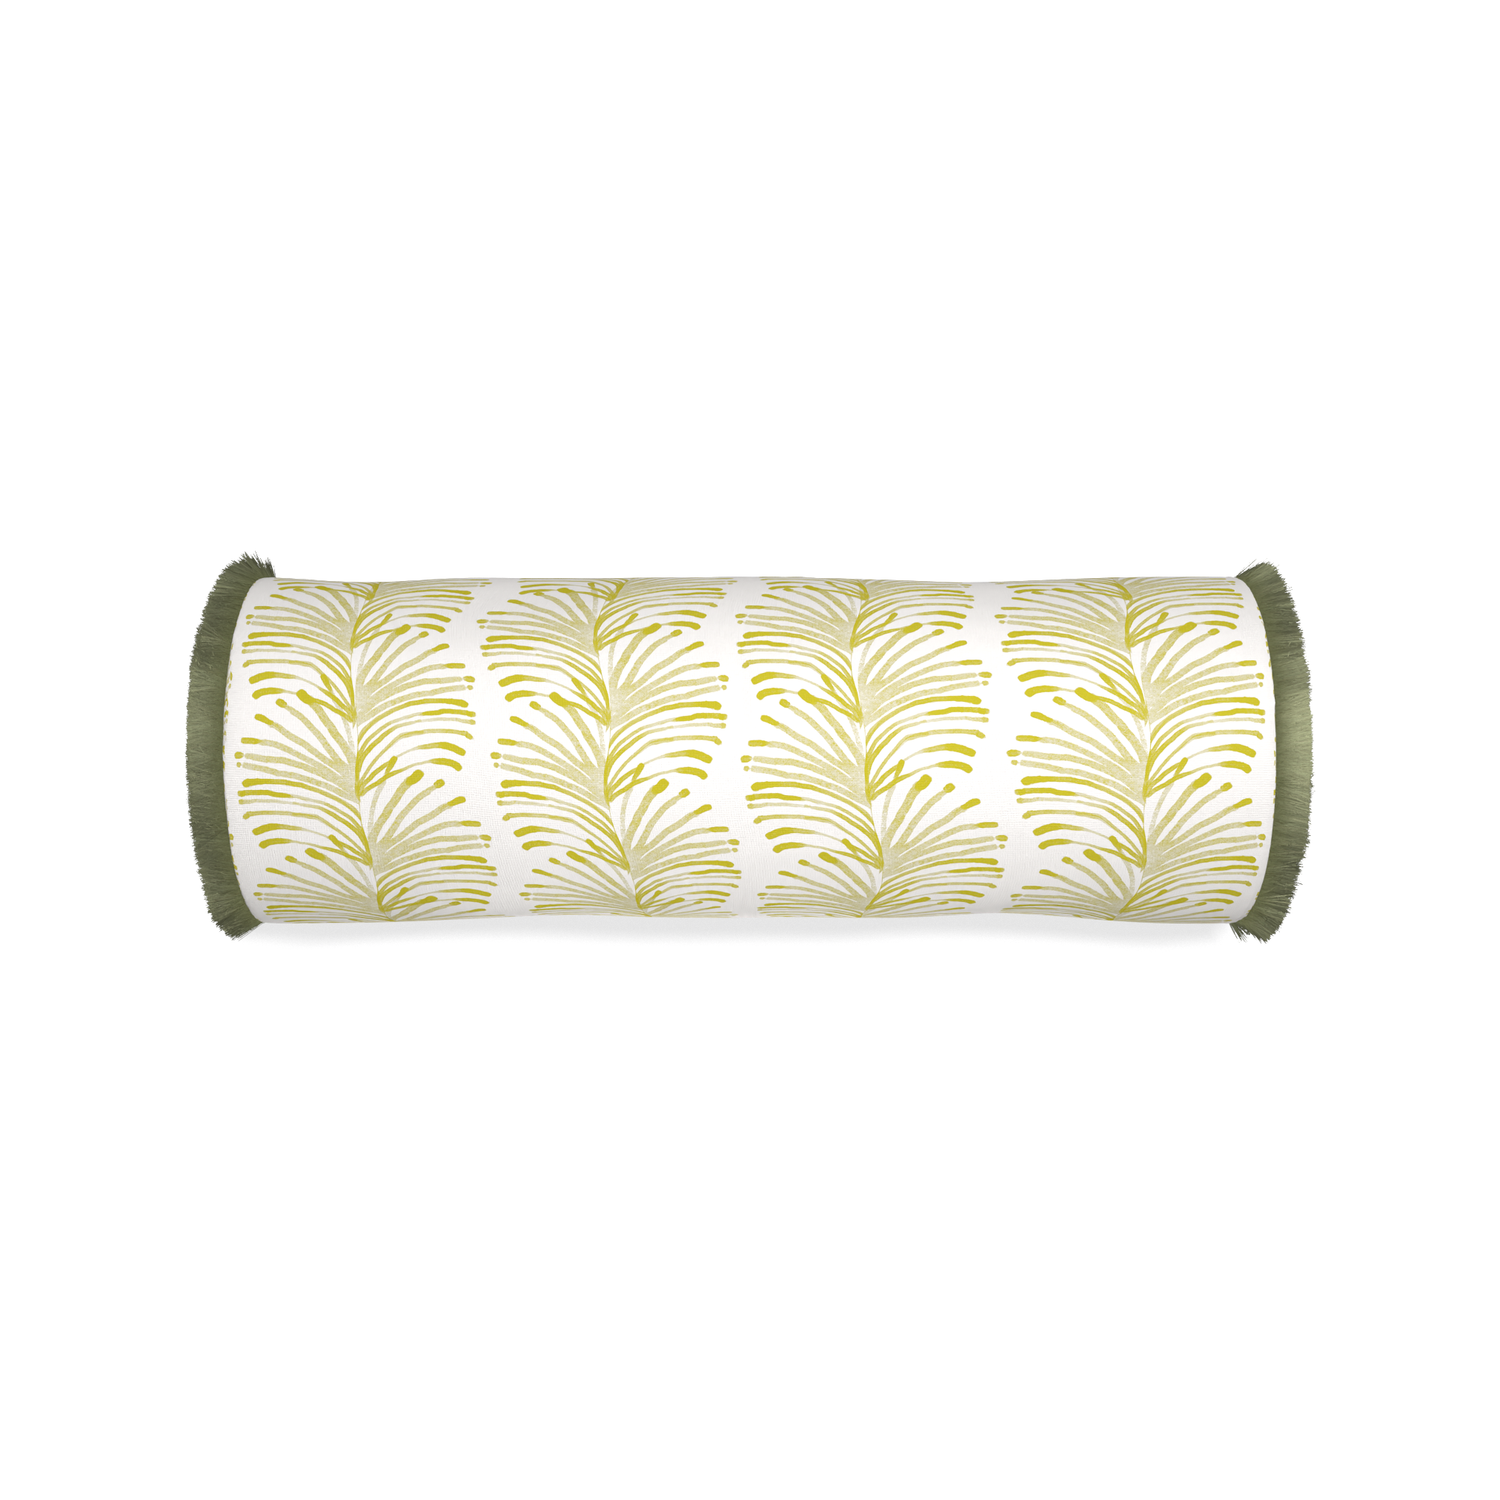 Bolster emma chartreuse custom pillow with sage fringe on white background